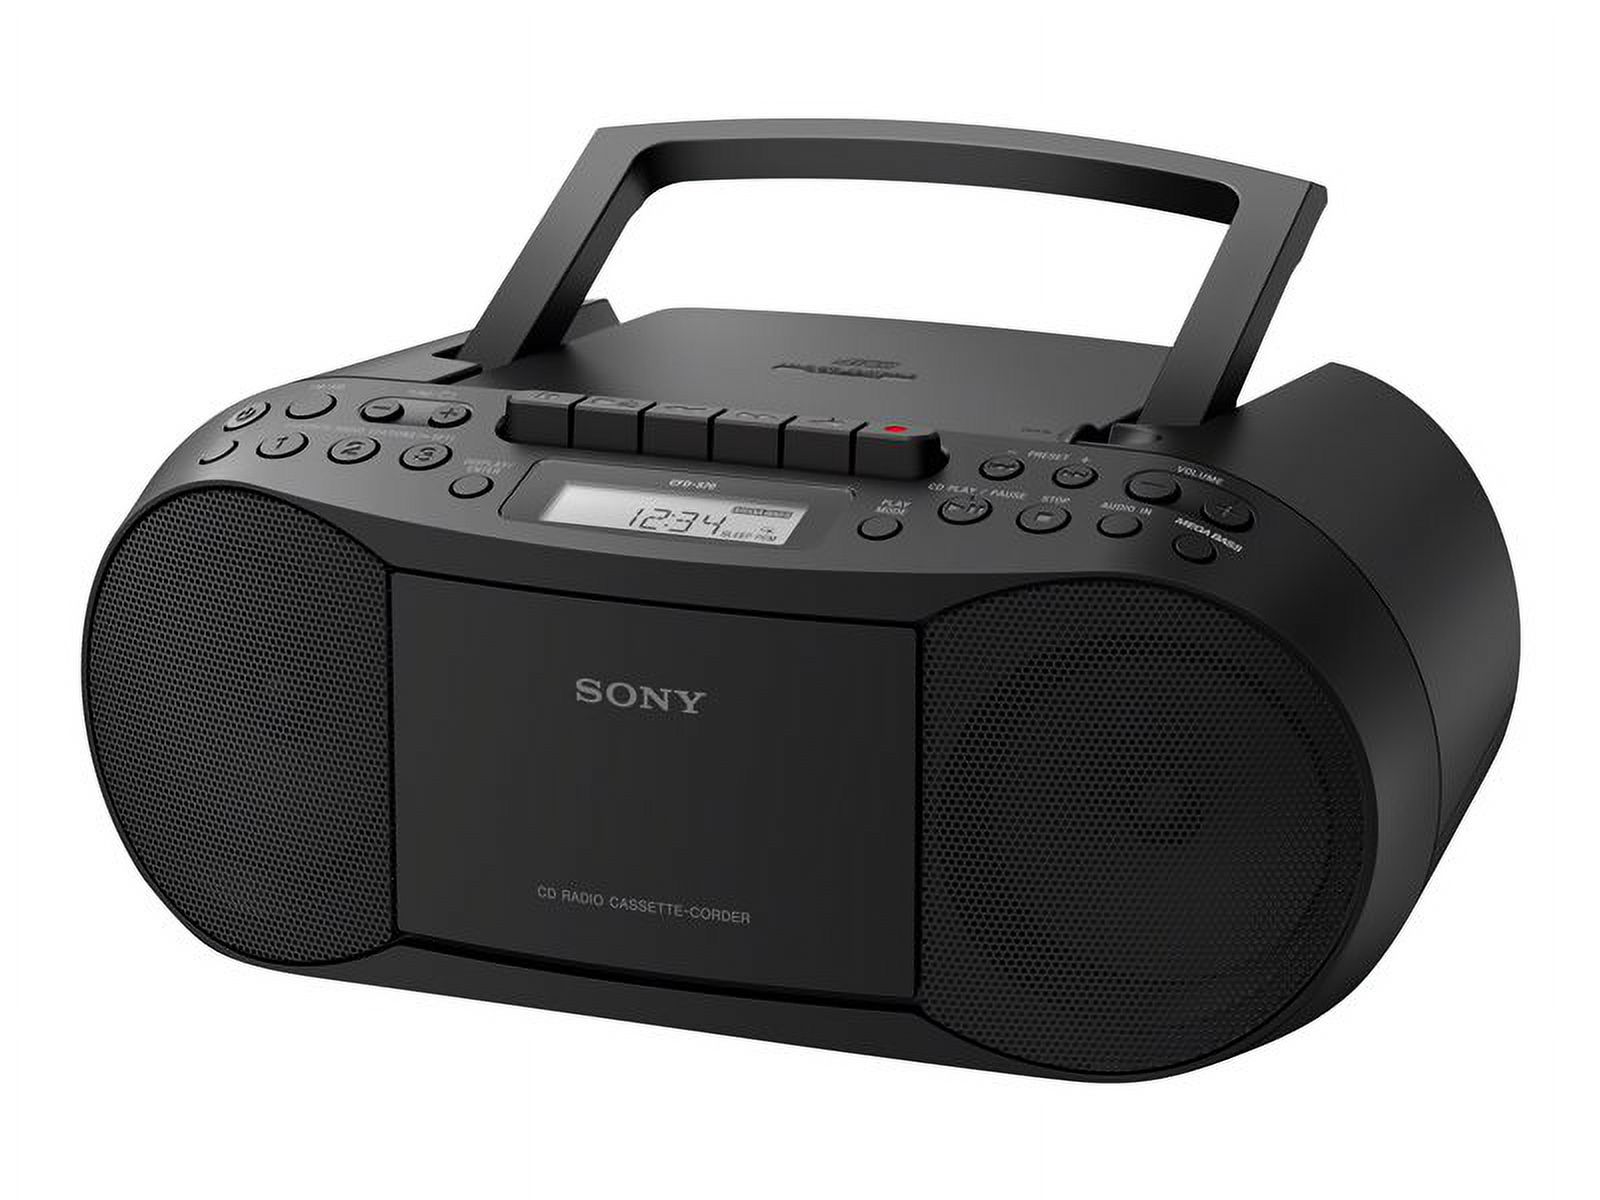 Sony CD/Cassette Boombox with Radio - 1 x Disc - 3.40 W Integrated Stereo Speaker - Black LCD - CD-DA, MP3 - 1.60 MHz AM - 108 MHz FM - 1.60 MHz MW - Auxiliary Input - image 2 of 5